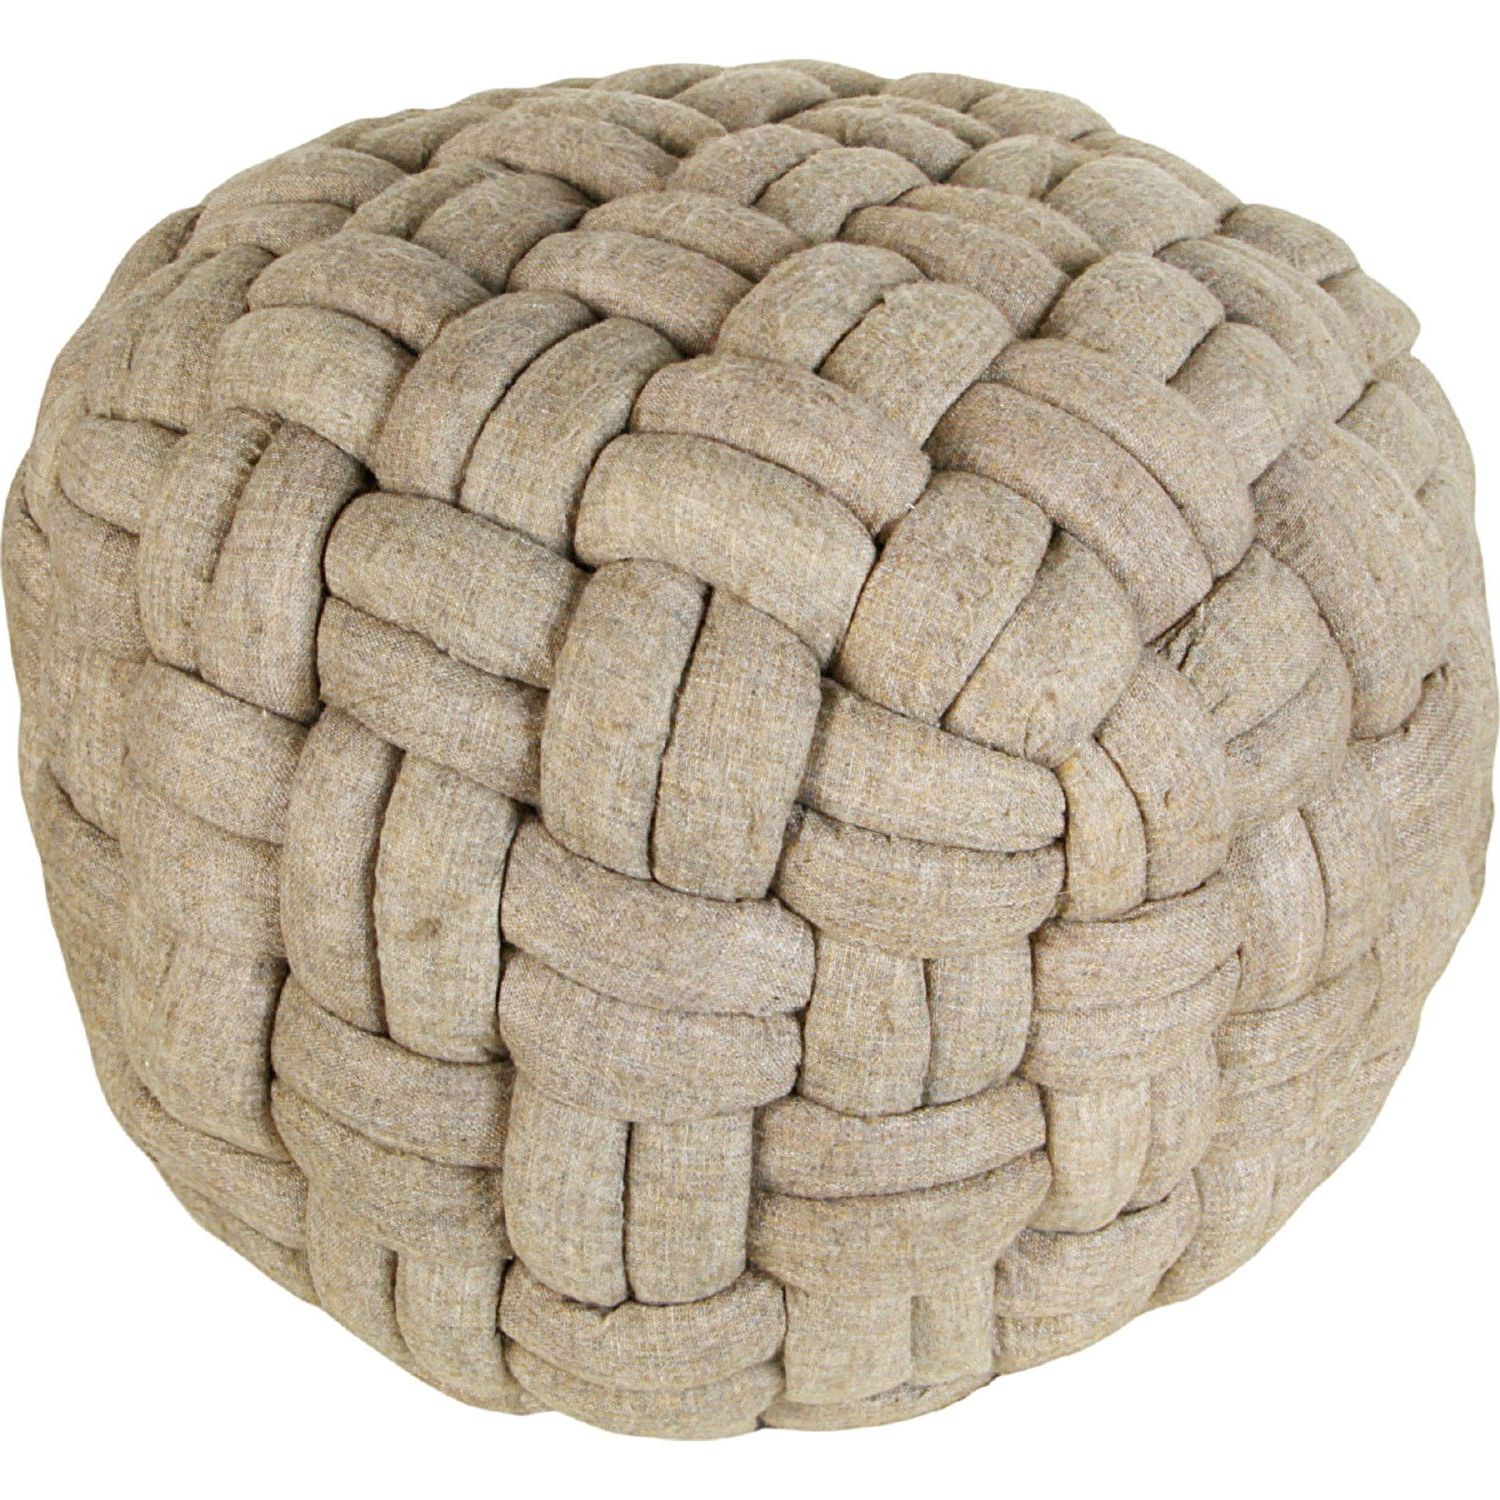 Scandinavia Knit Tan Wool Cube Pouf Ottomans Inside Most Recently Released Moe's Home Collection Lk 1004 21 Bronya Pouf Cappuccino Pashmina Wool (View 7 of 10)